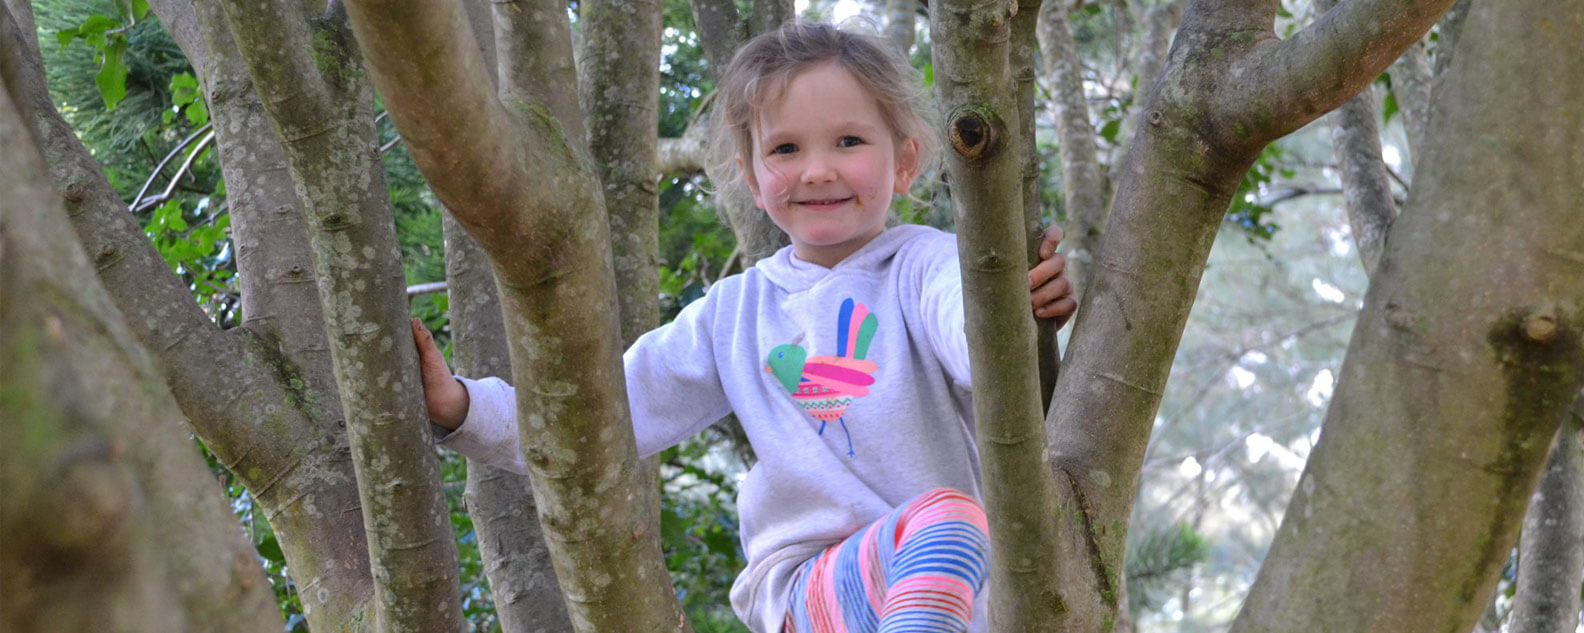 A child climbing in the canopy of a tree.